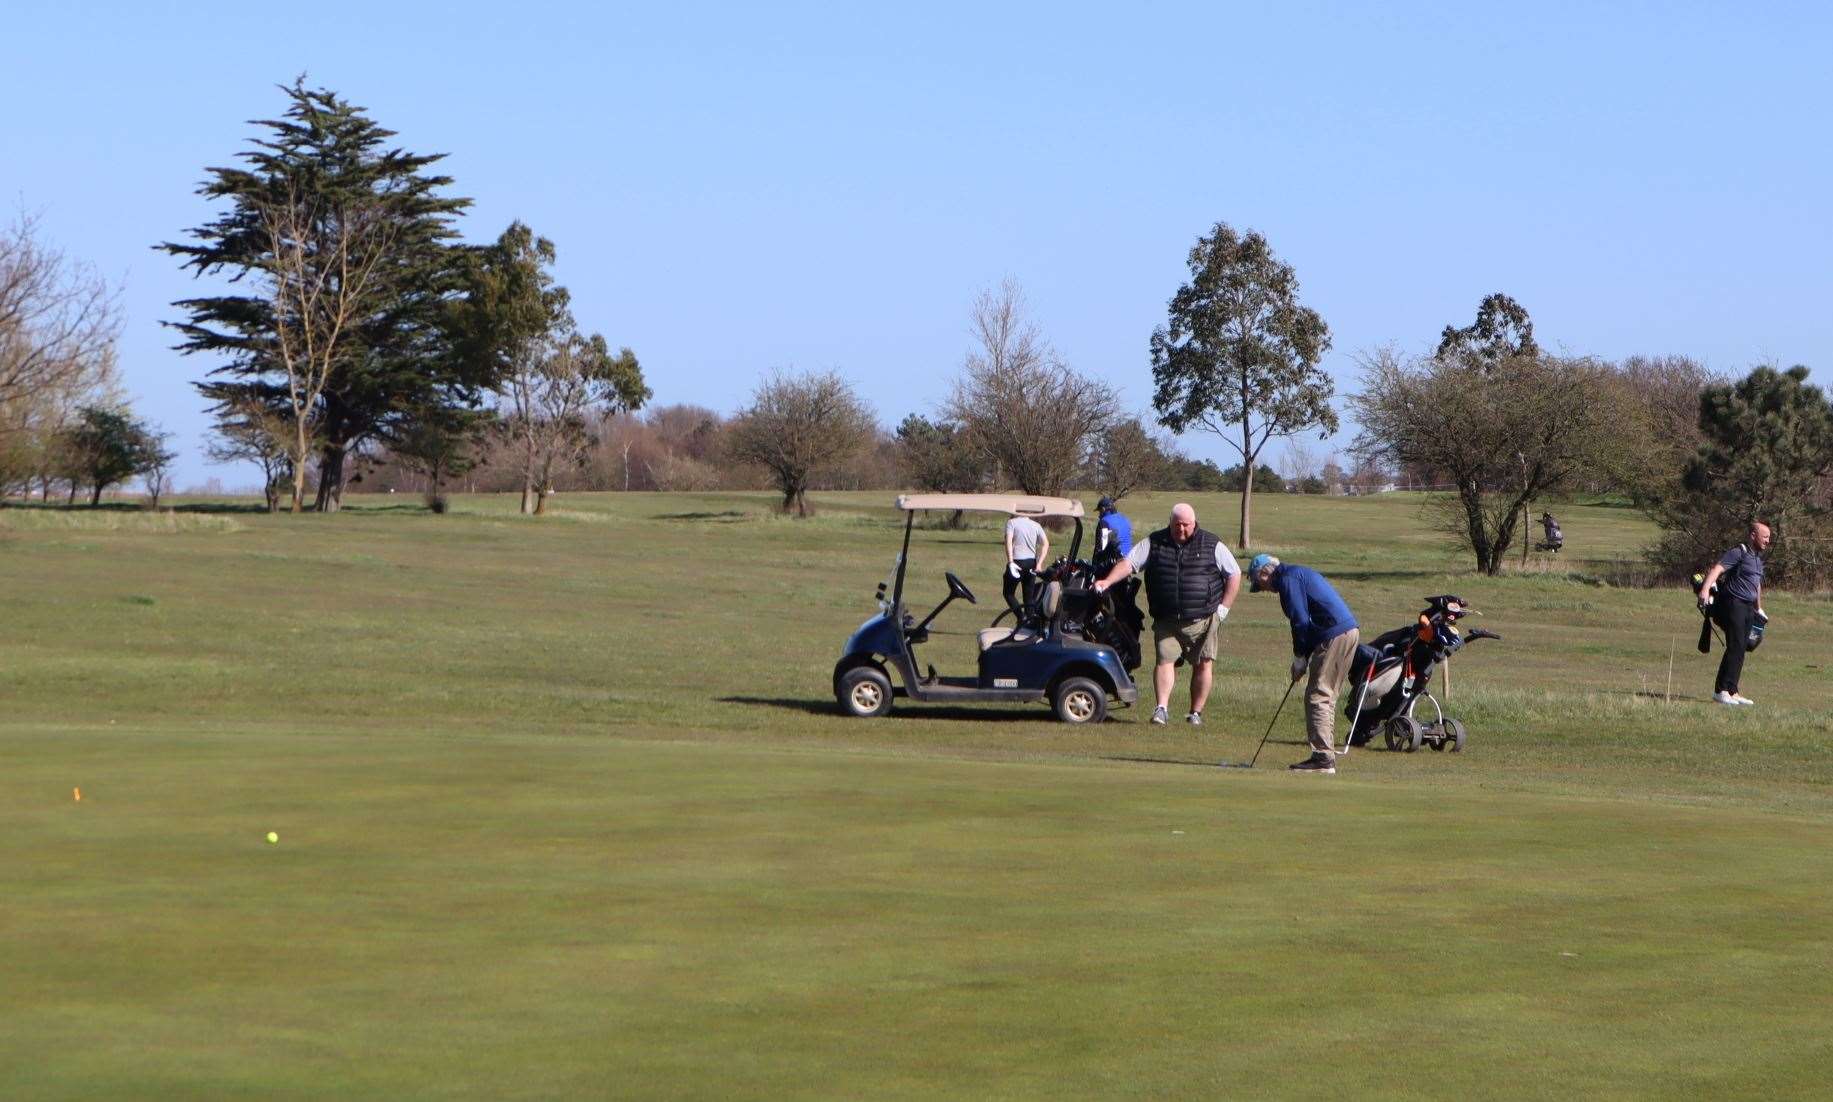 Golfers on the green at Sheerness Golf Club on Monday as the Covid-19 restrictions were eased